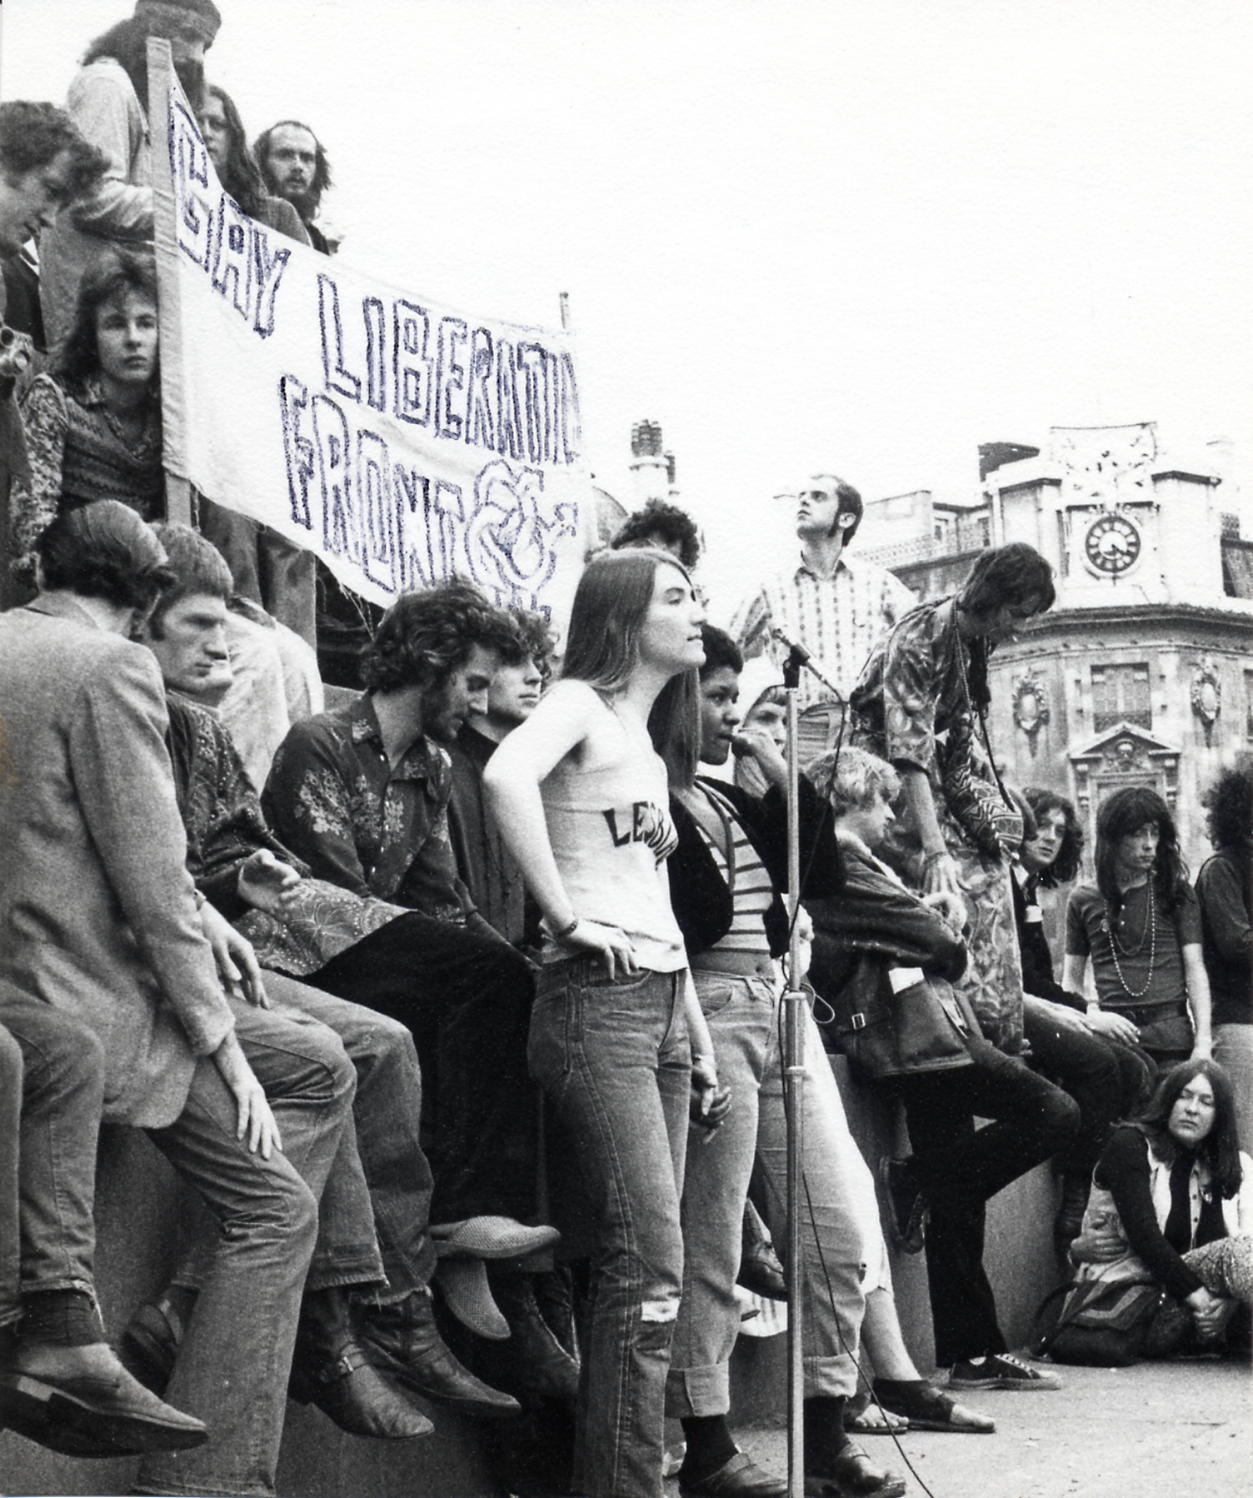 Demonstrators with London, U.K.'s Gay Liberation Front.